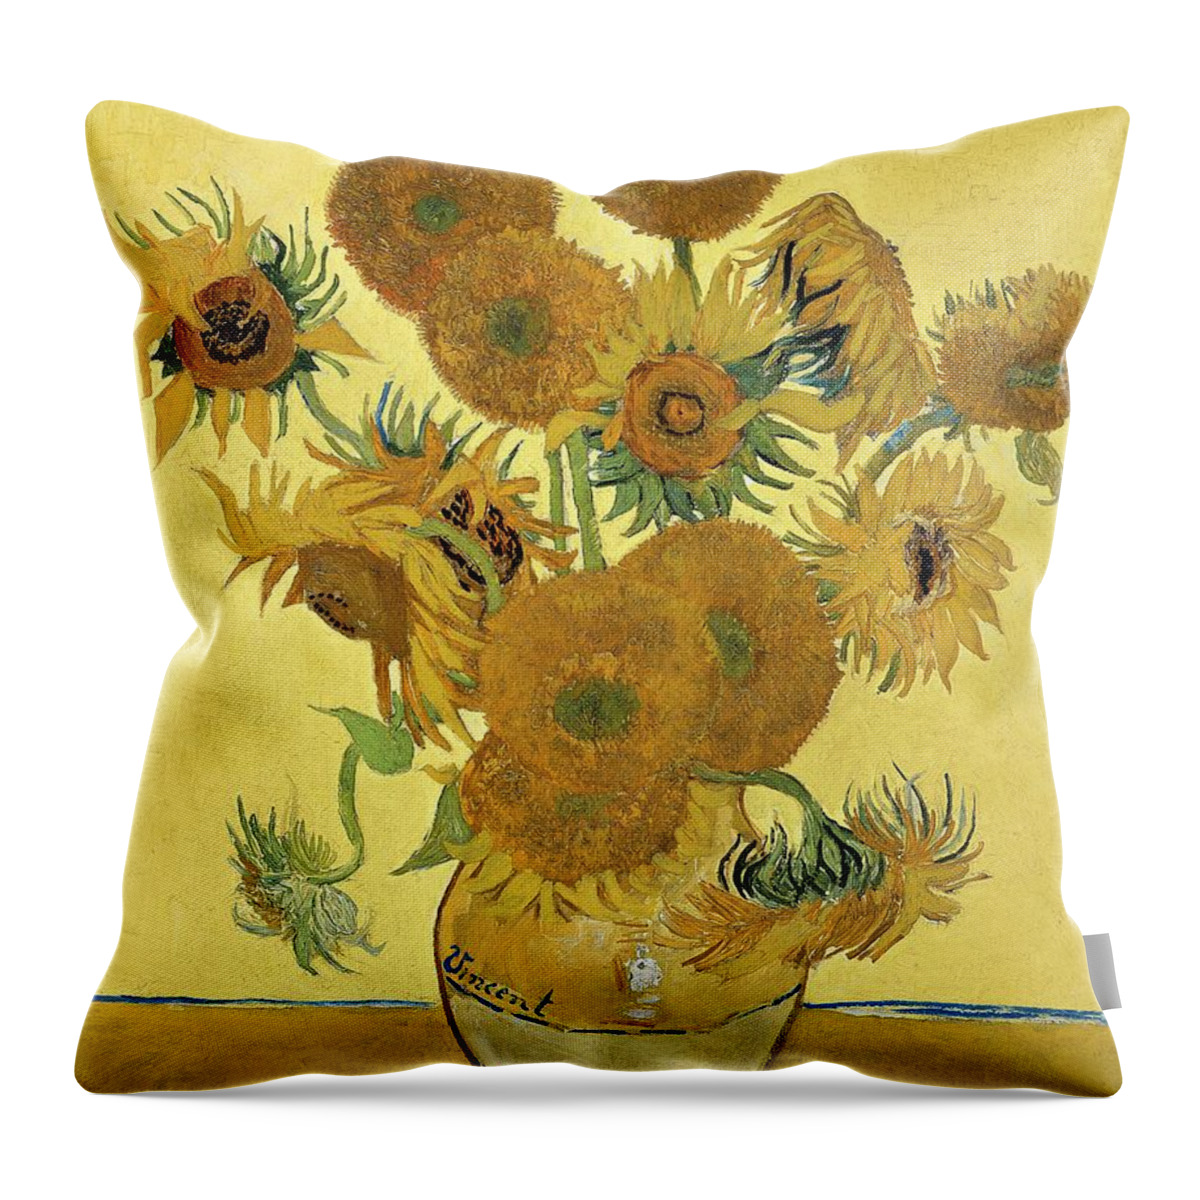 #faatoppicks Throw Pillow featuring the painting Sunflowers, 1888 by Vincent Van Gogh